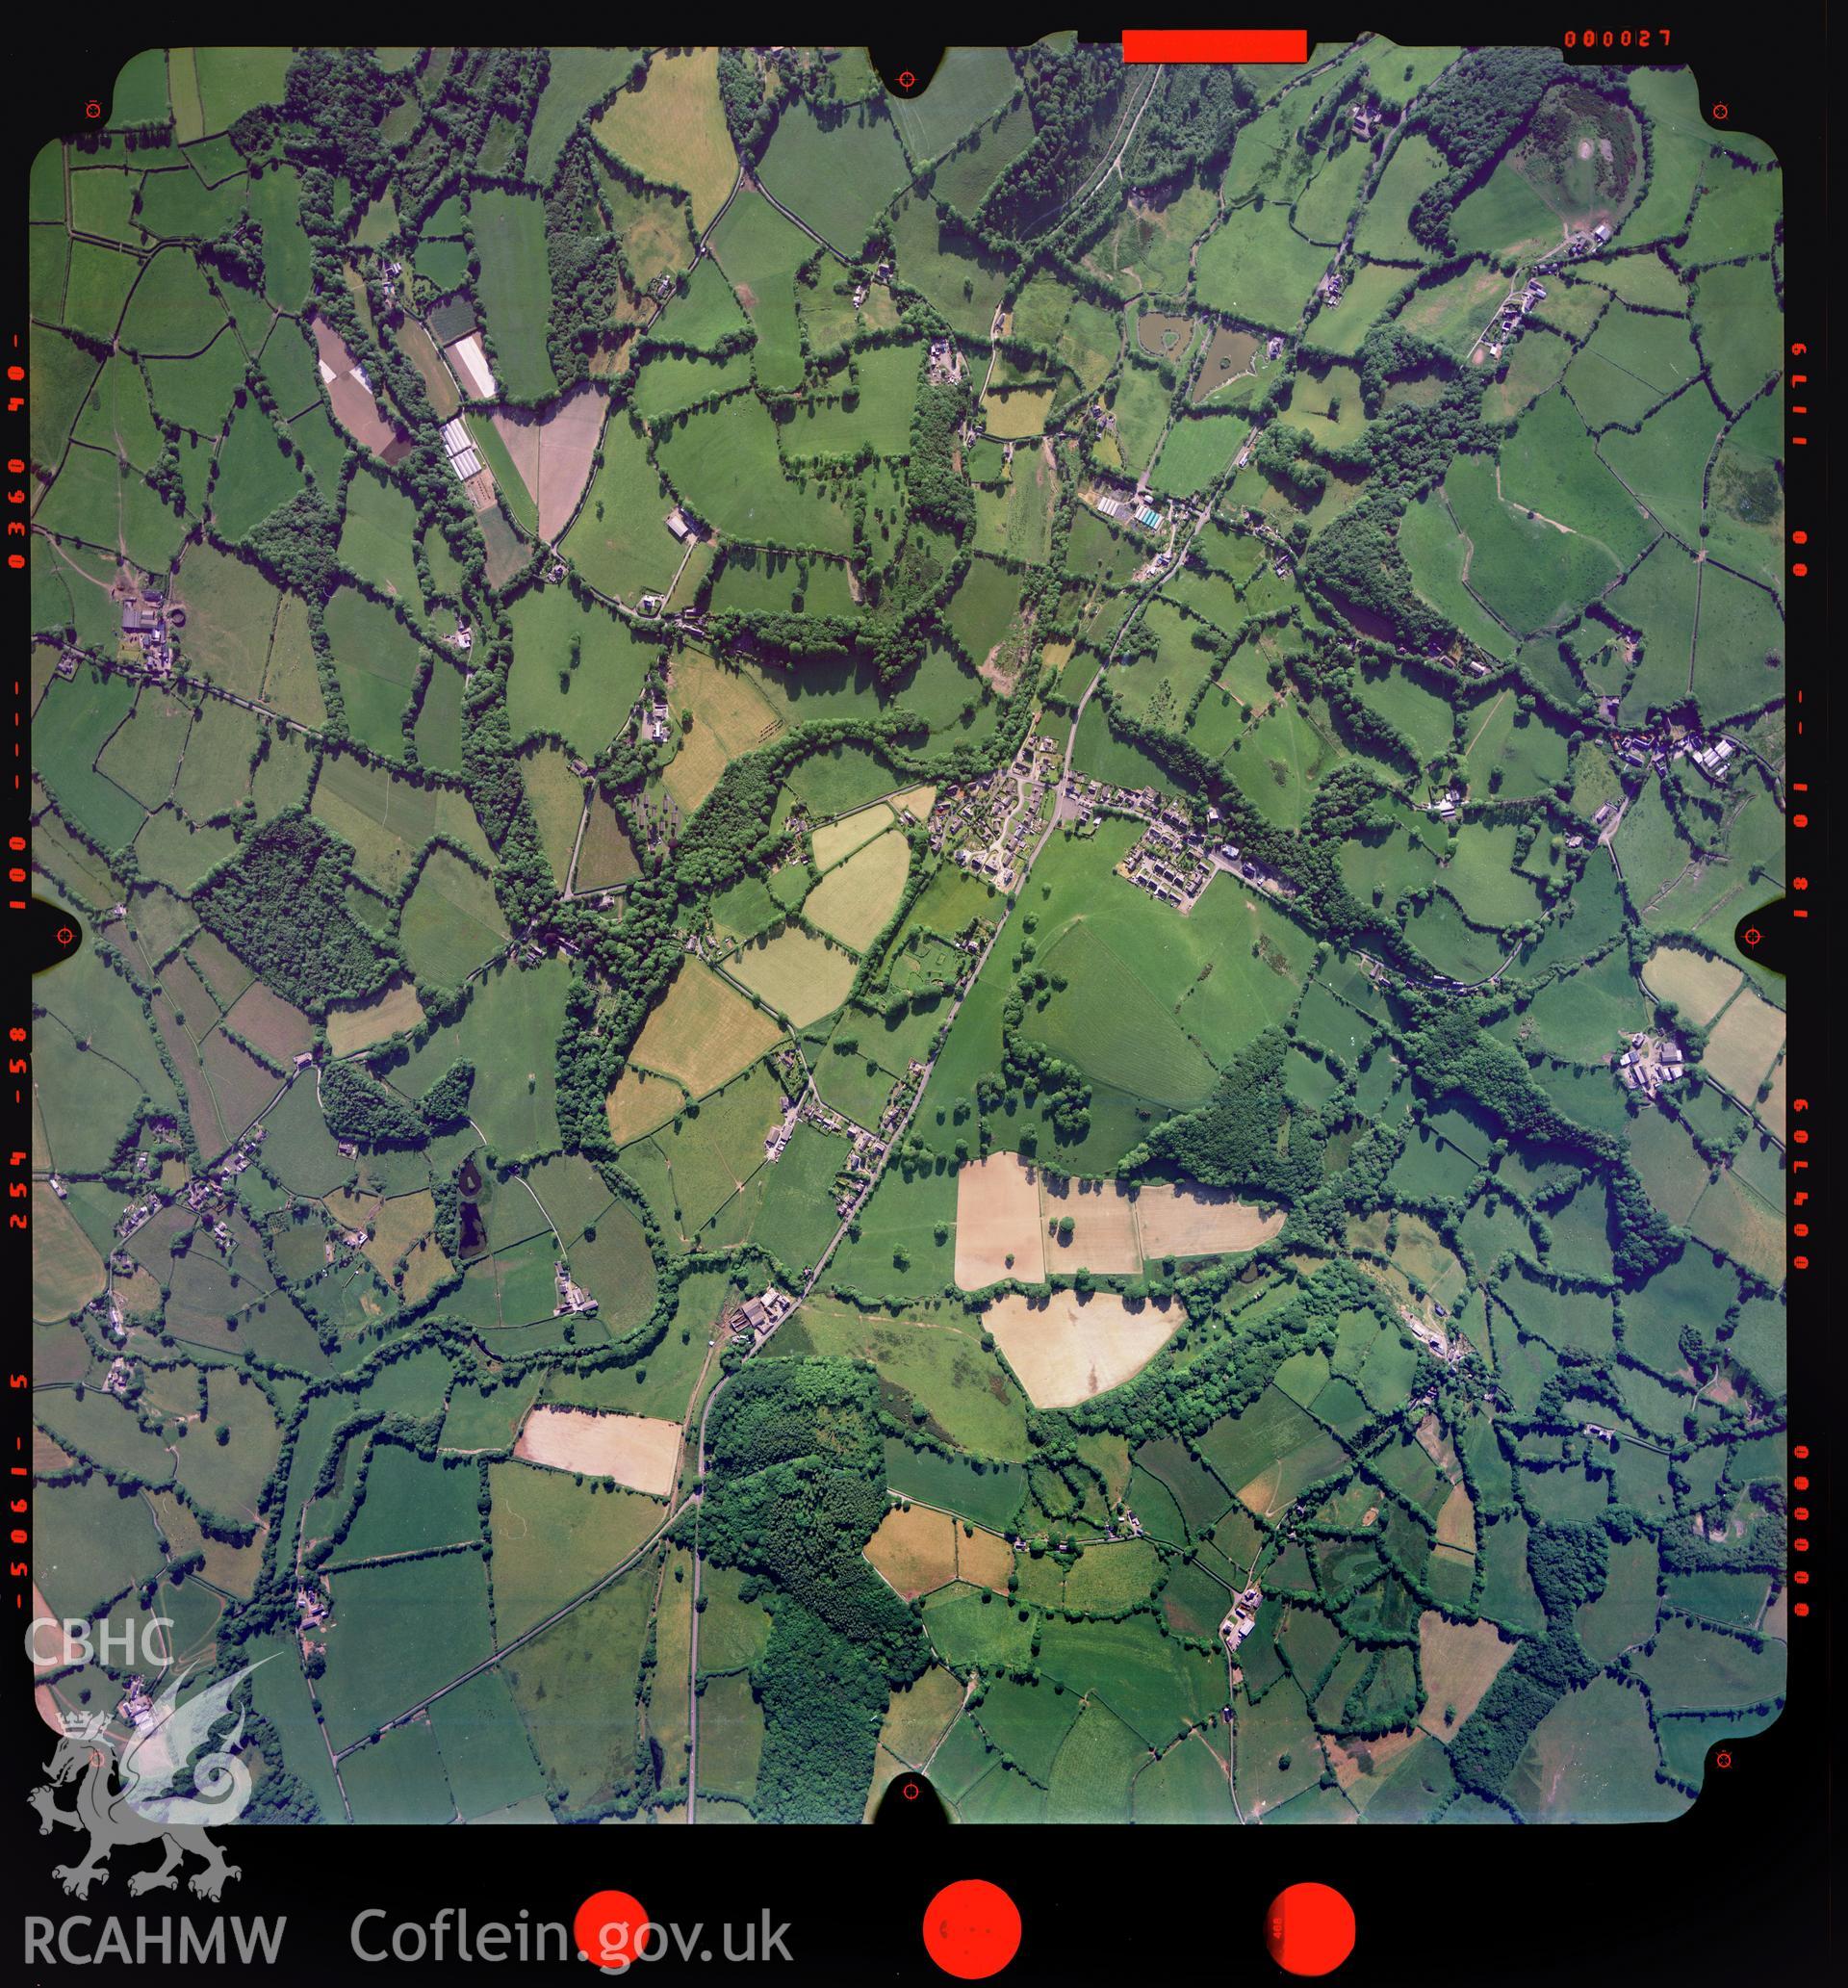 Digitized copy of a colour aerial photograph showing the Ciliau Aeron area, taken by Ordnance Survey, 2005.